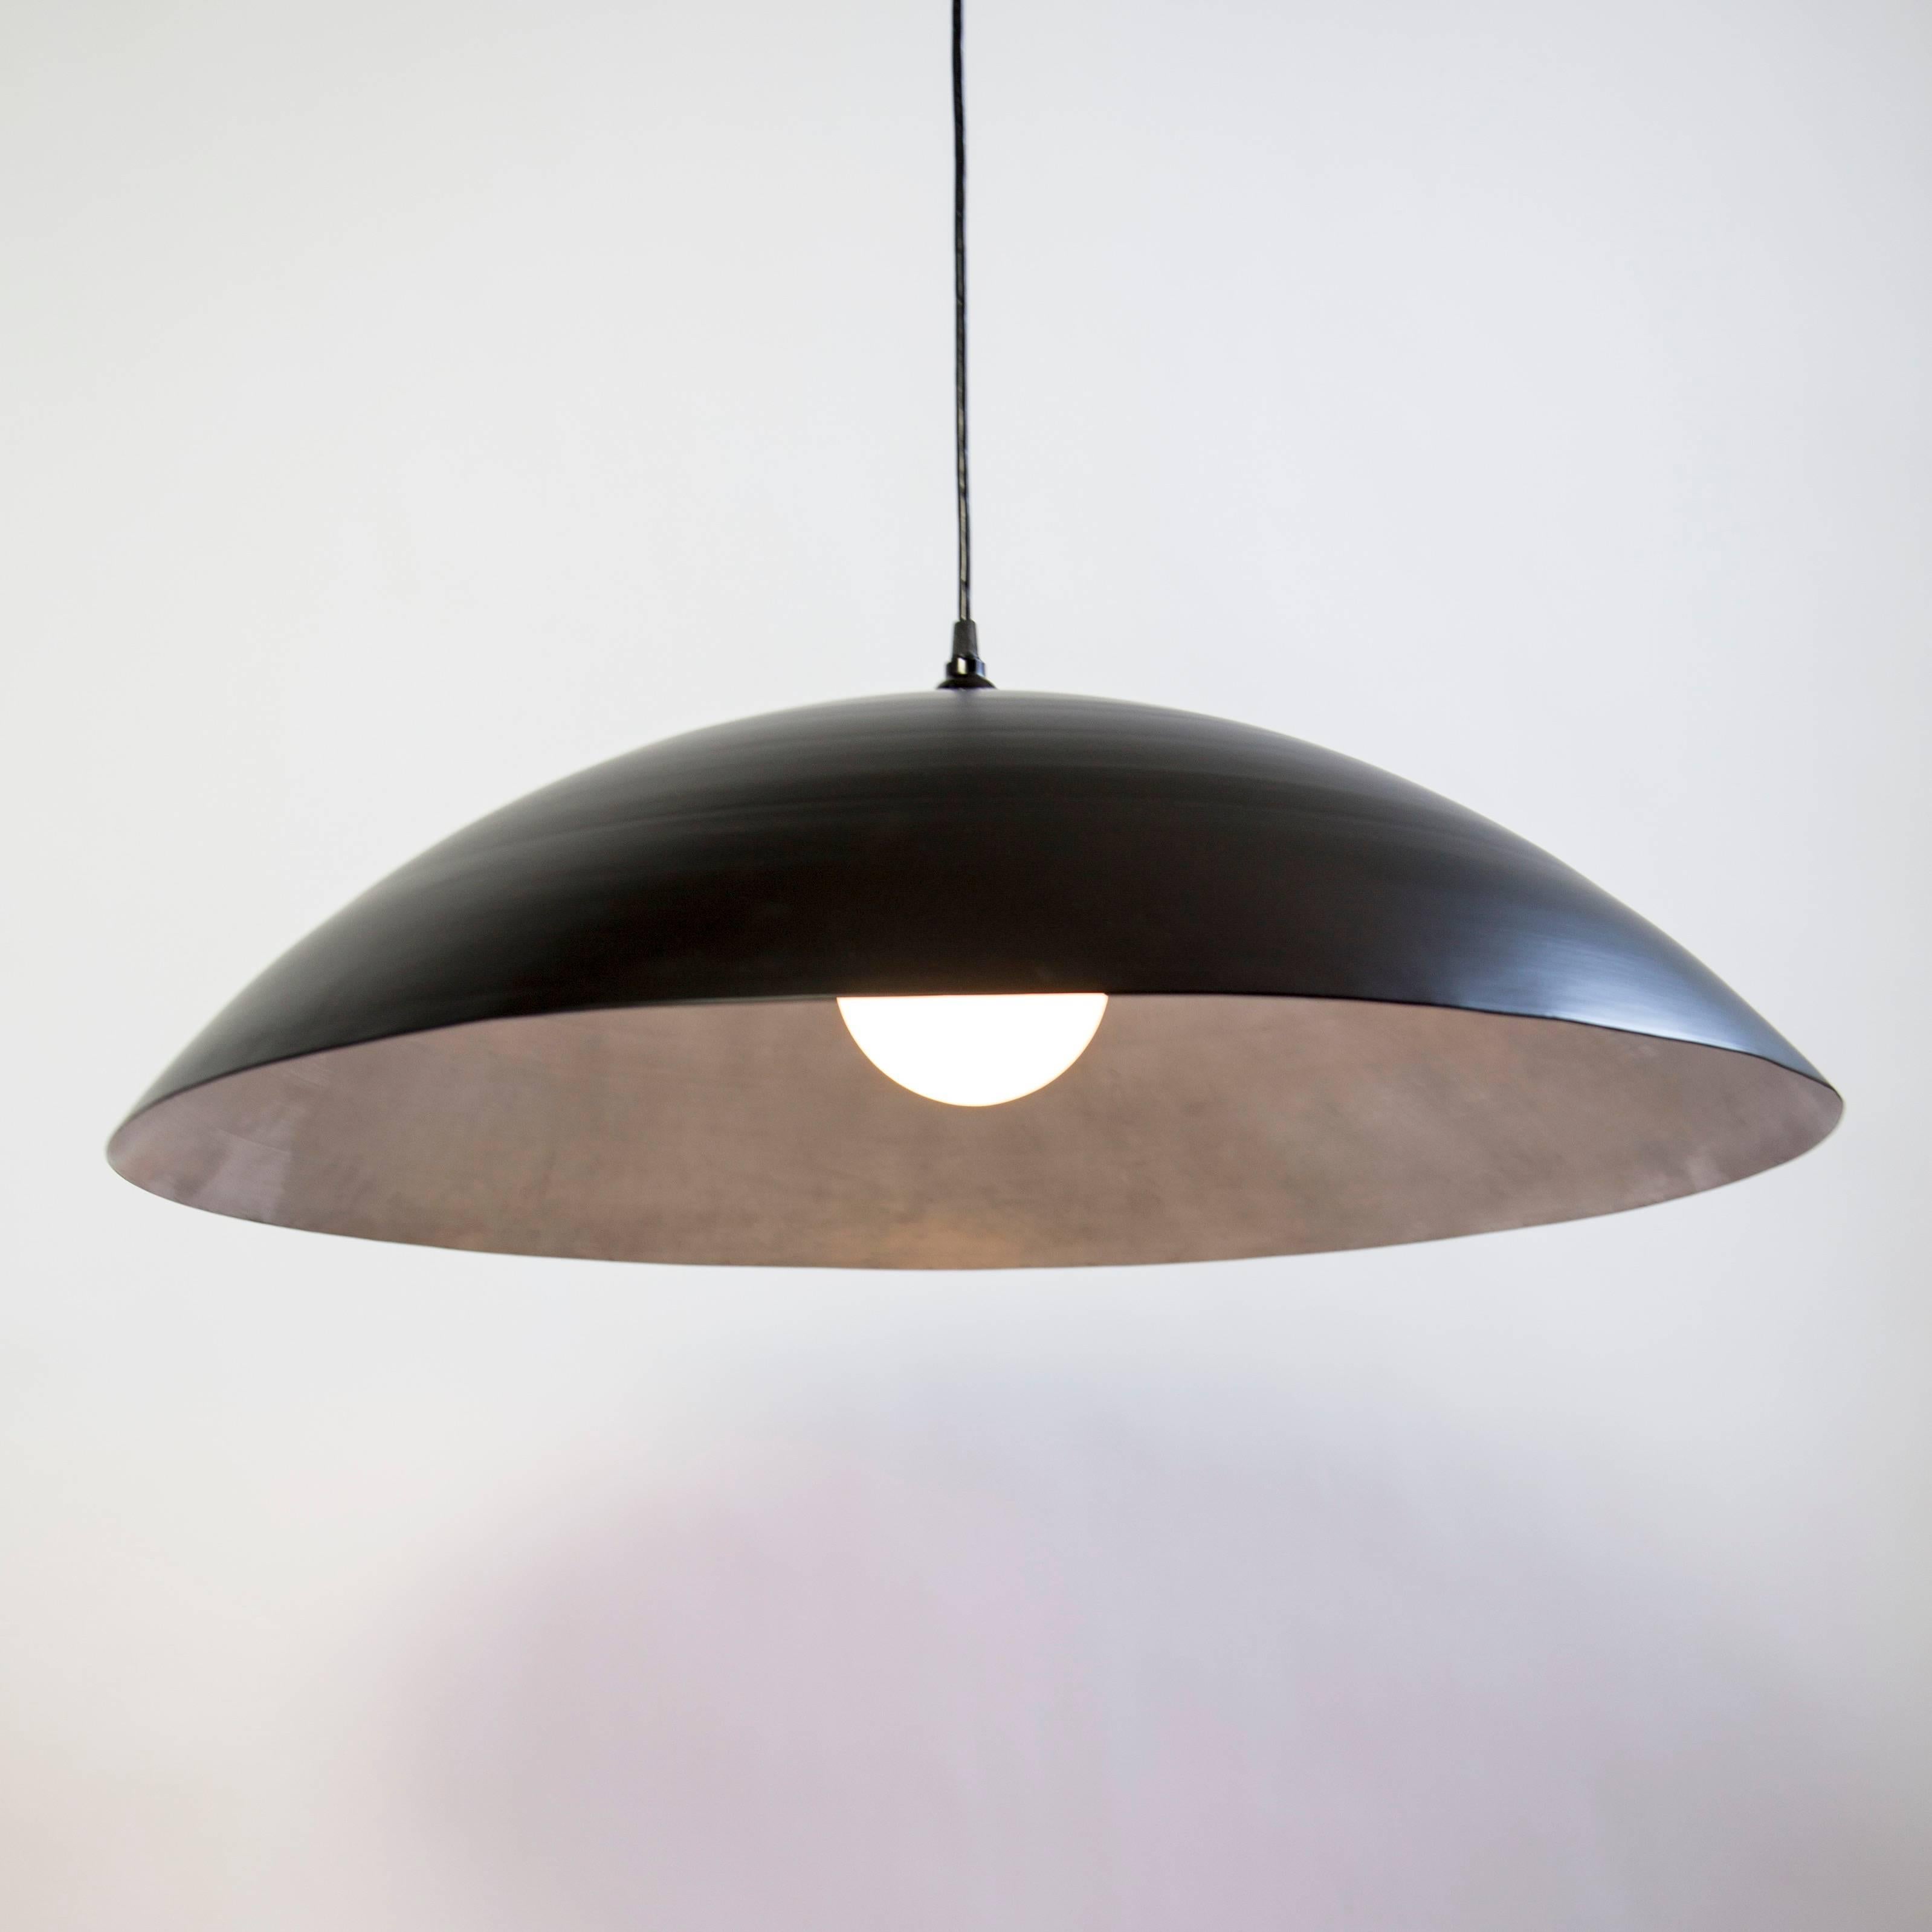 Customizable Oversized Pendant by Research Lighting, Cadet Blue & Silver, MTO In New Condition For Sale In Brooklyn, NY